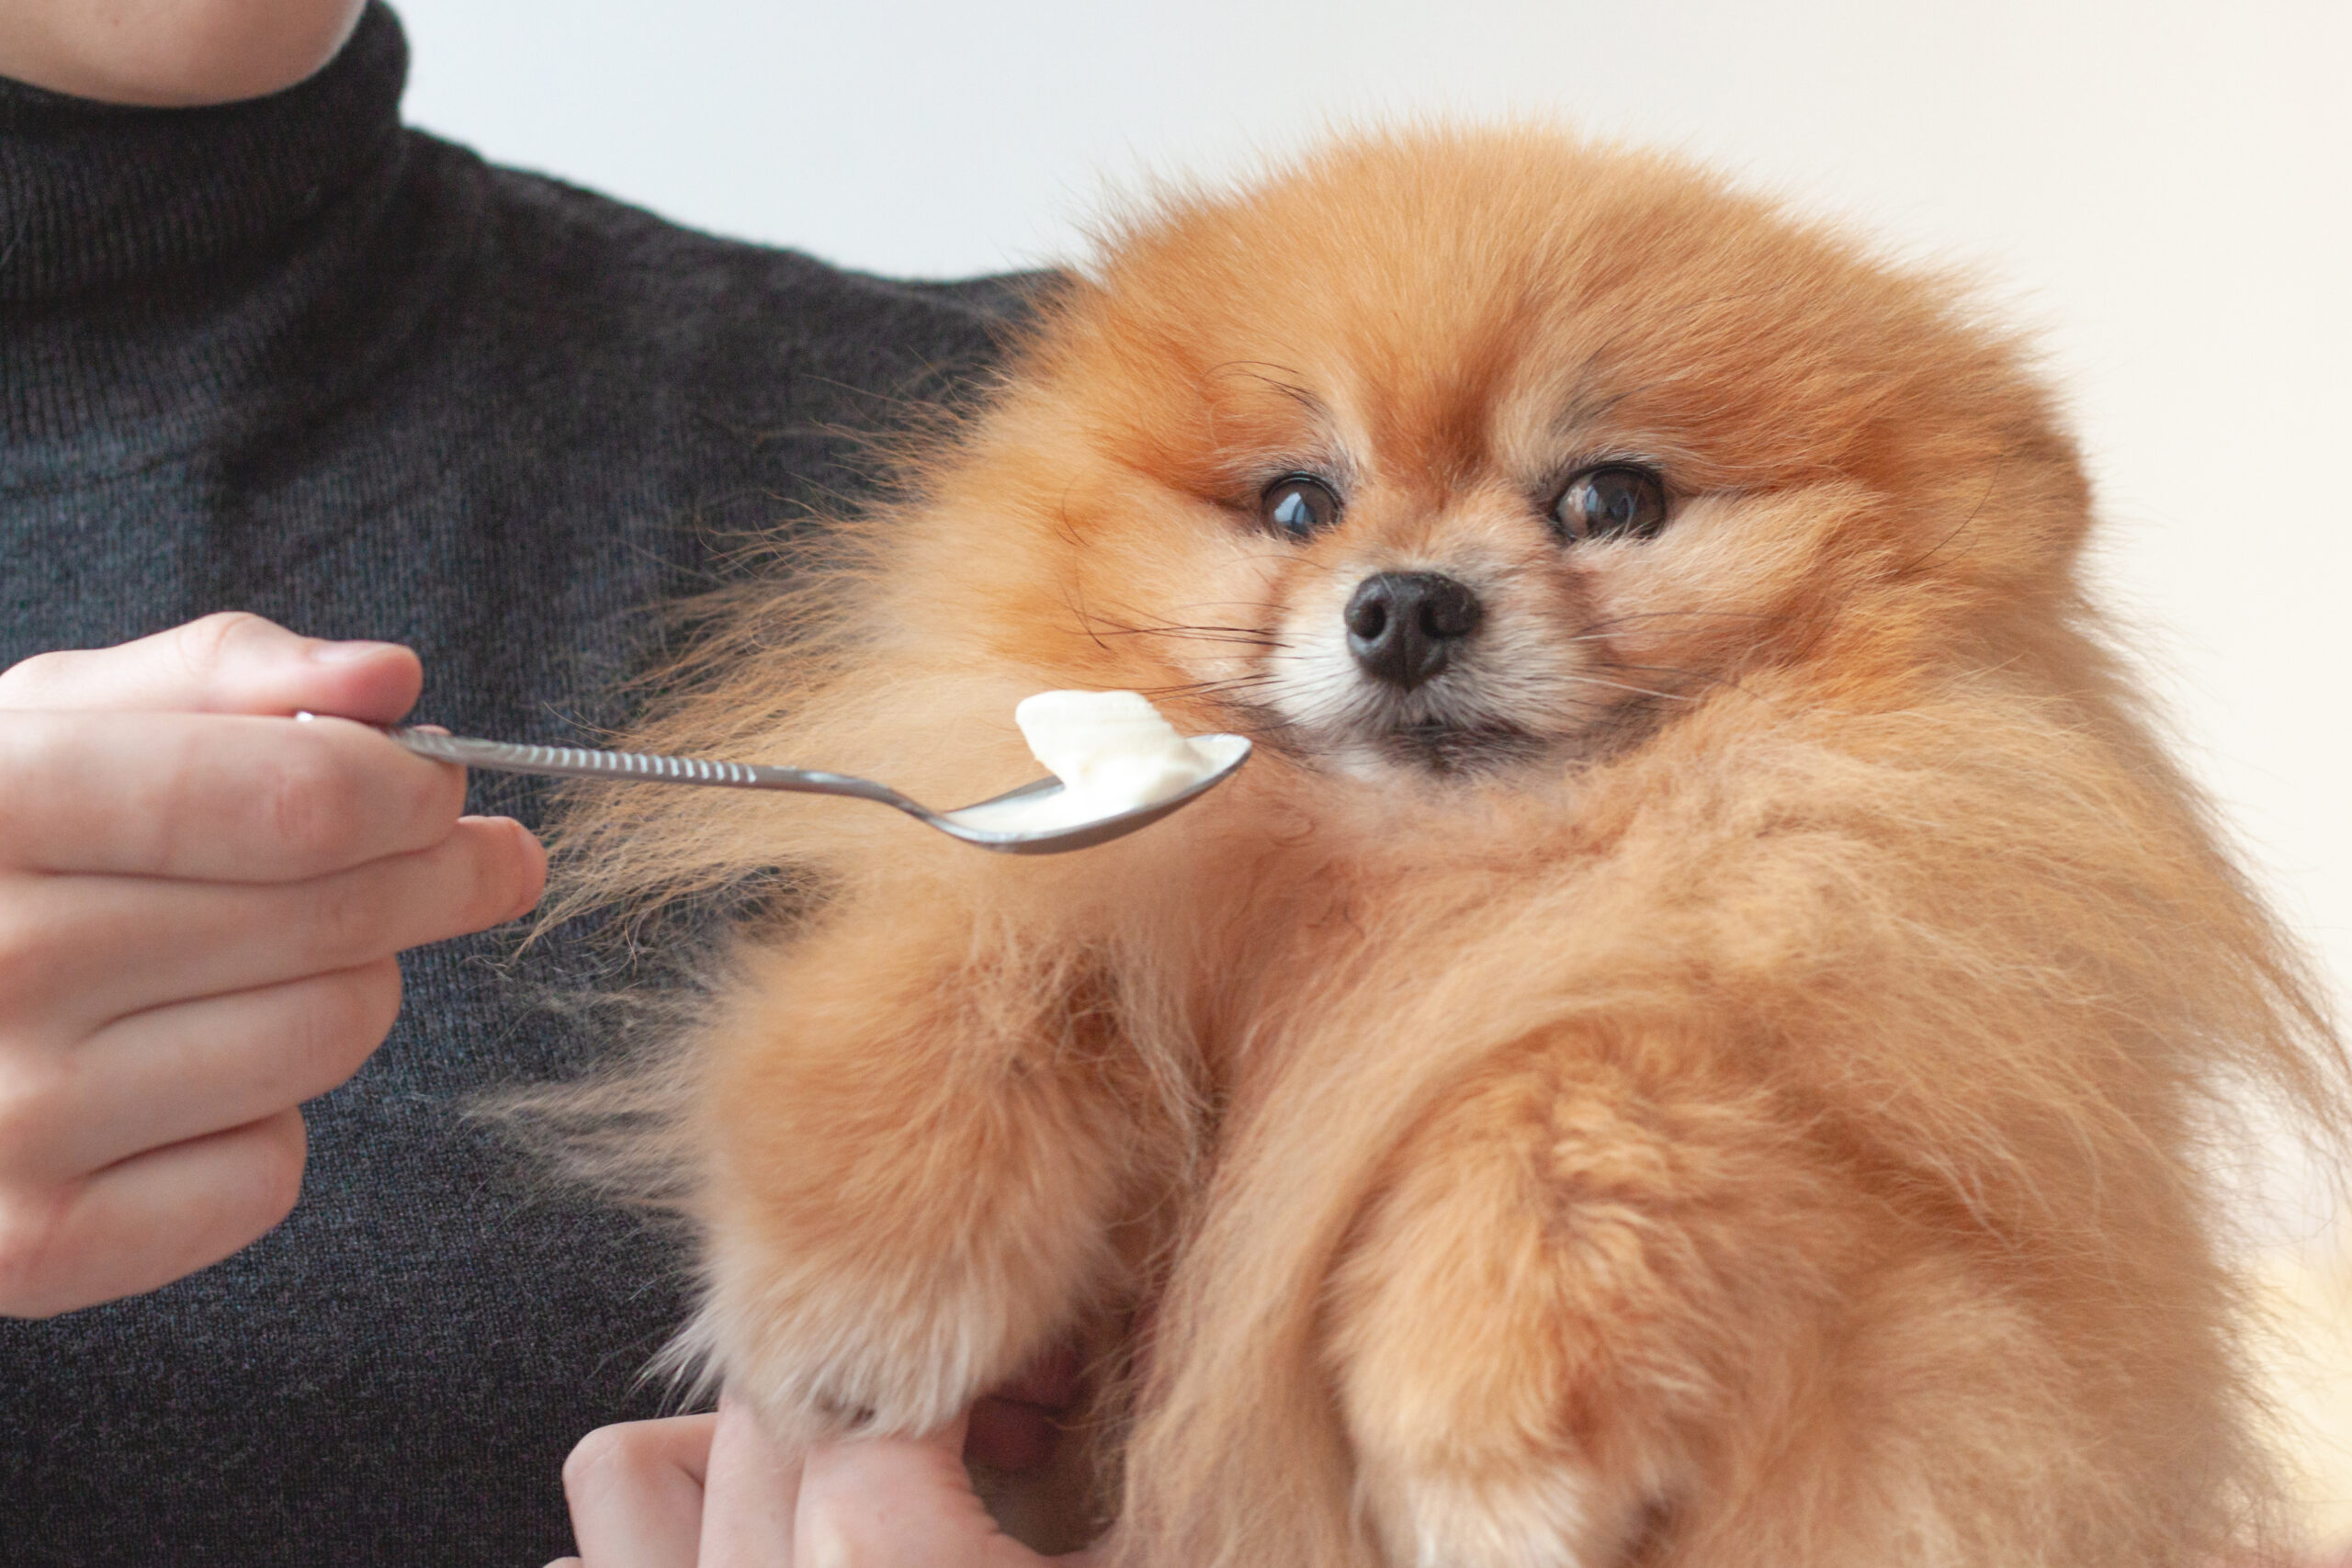 A girl in a gray turtleneck holds a surprised, fluffy, little orange-colored Pomeranian dog in her arms and tries to feed it with a spoon.